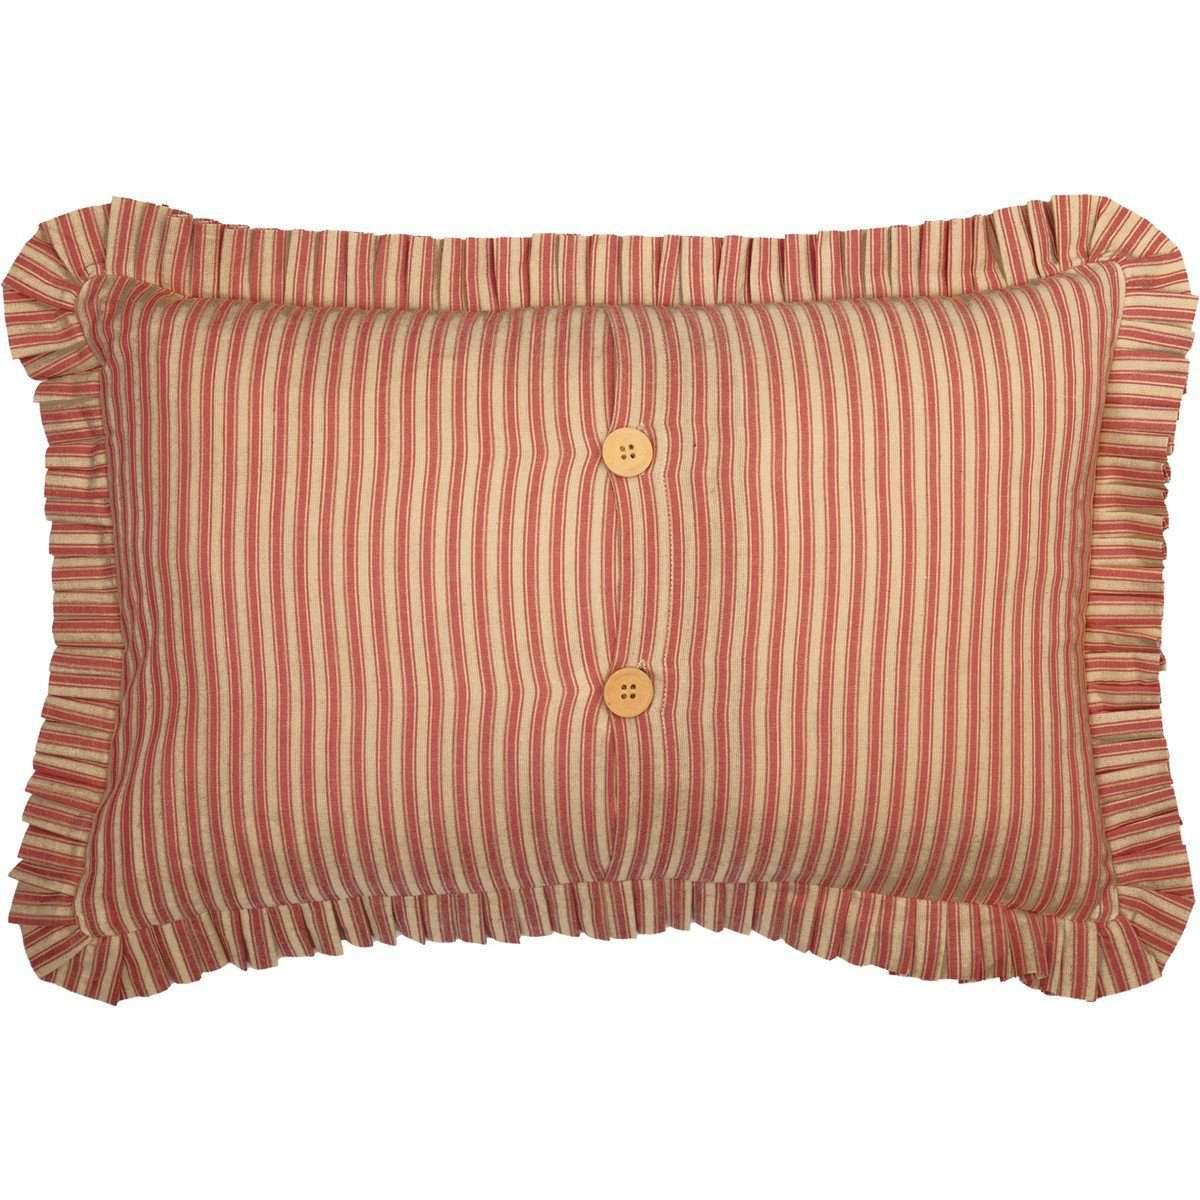 Rory Schoolhouse Red Ticking Stripe Fabric Pillow 14x22 VHC Brands back